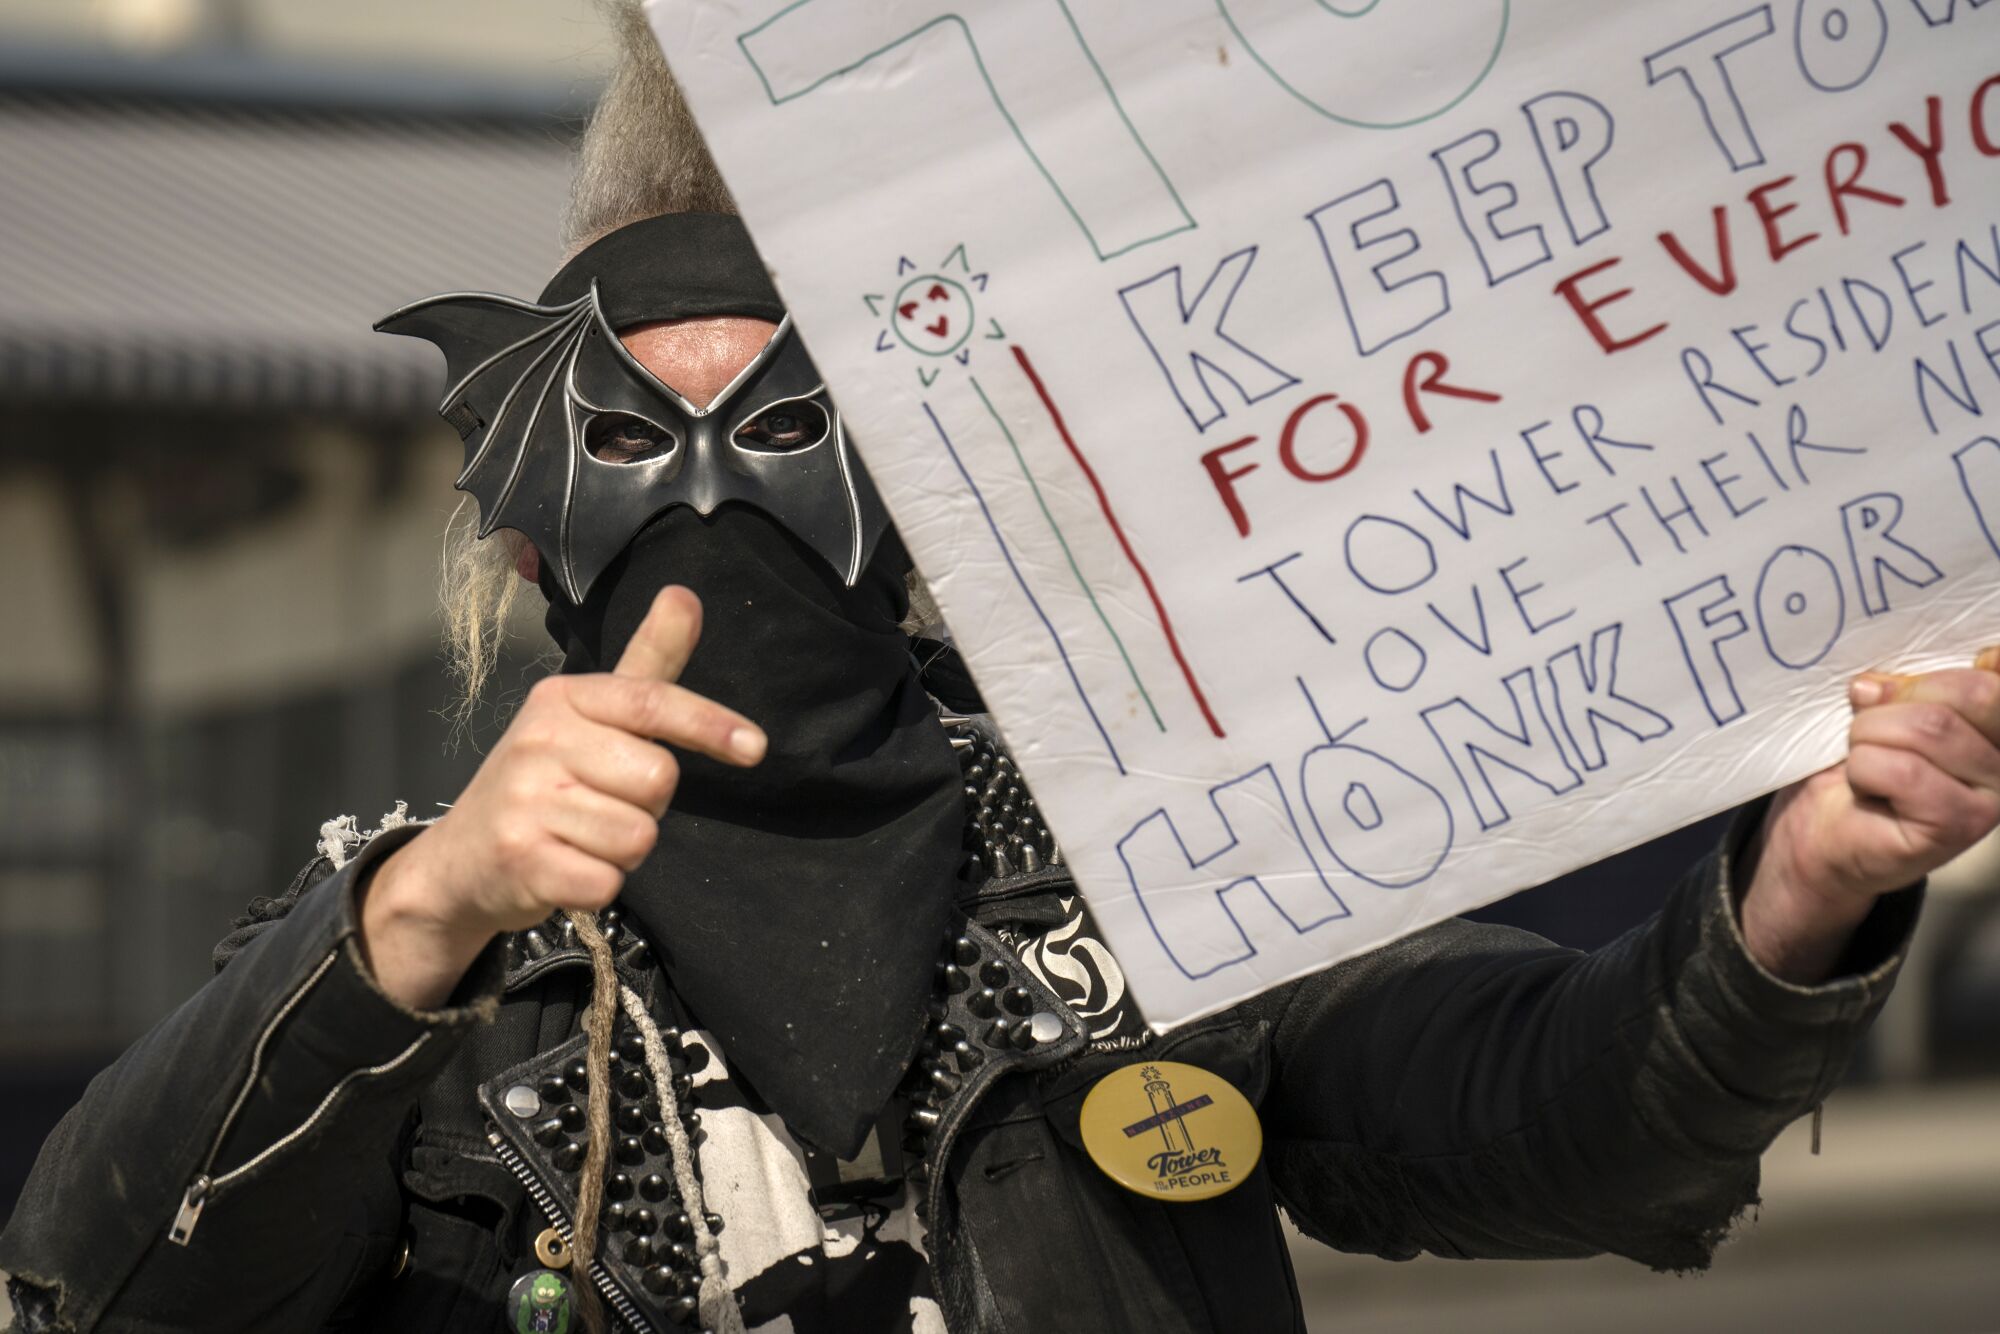 A man in a leather jacket and a bat mask holds a hand-written sign